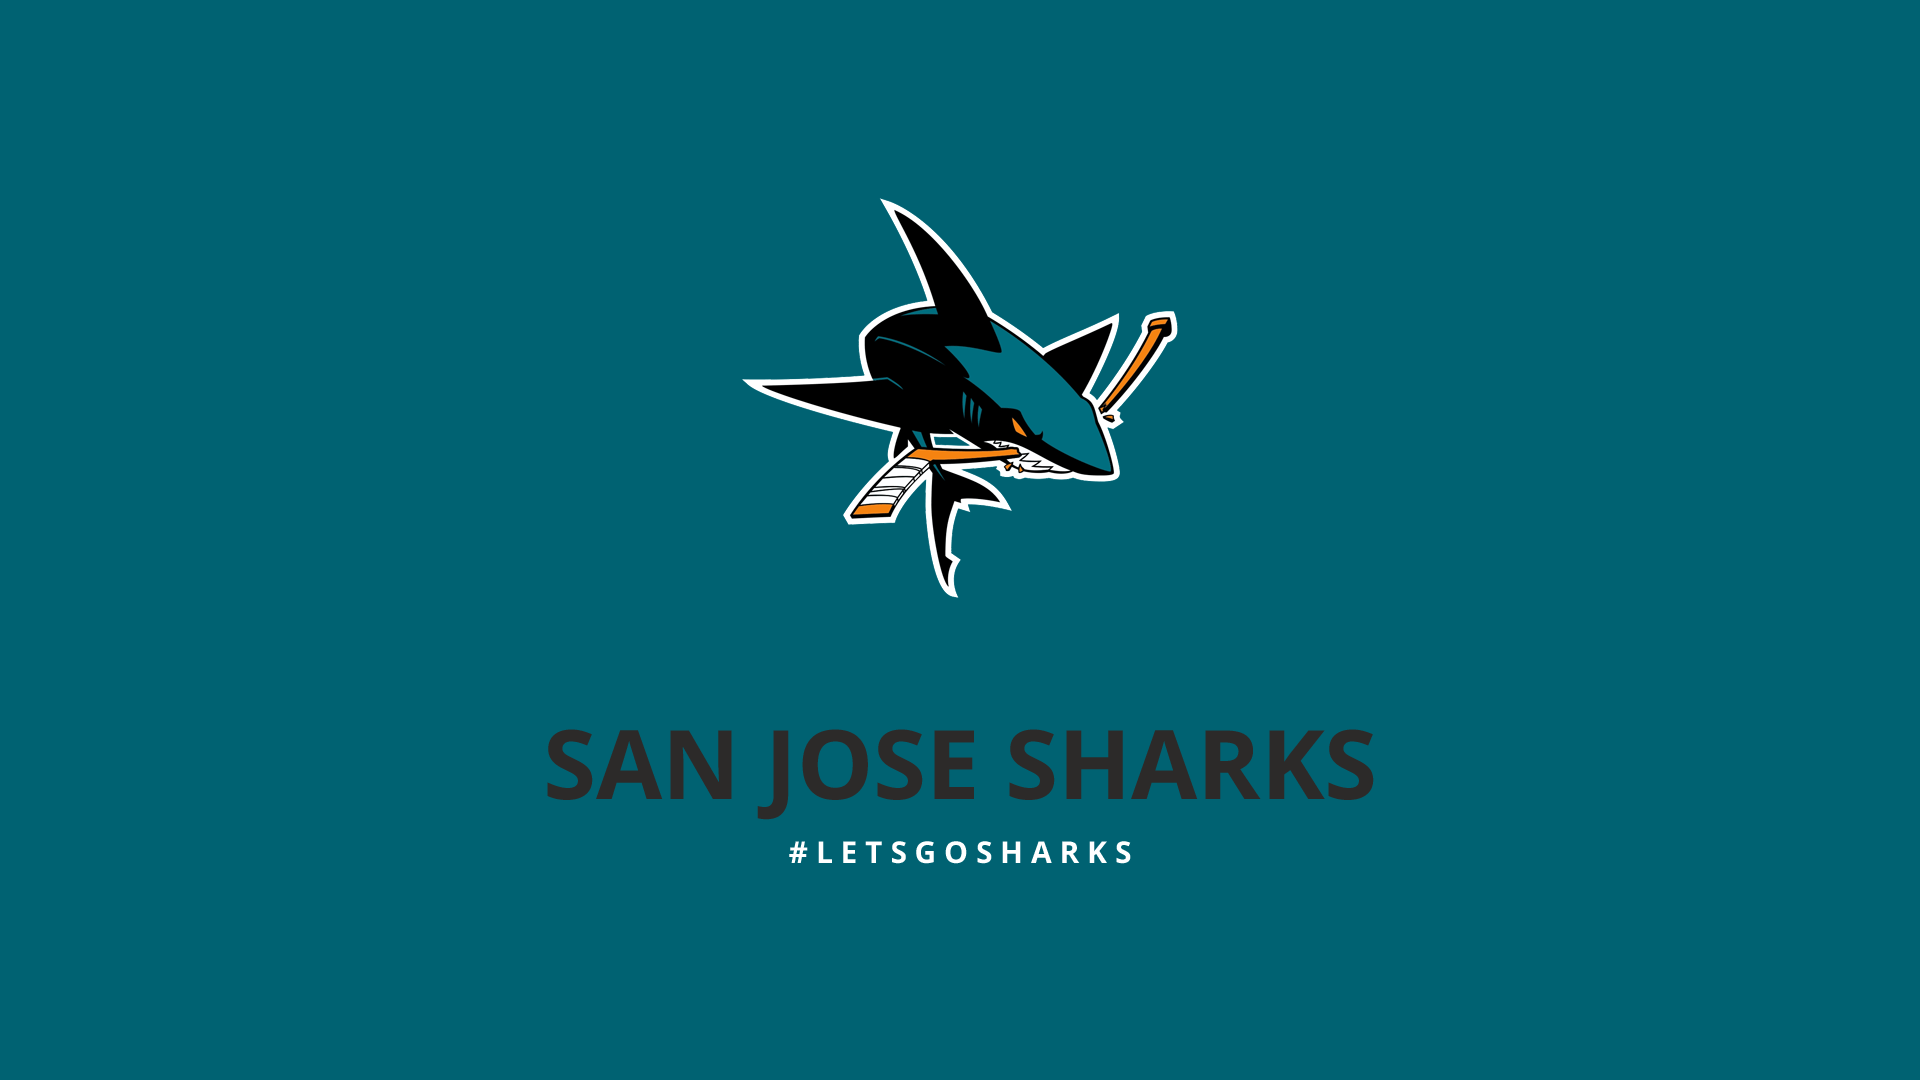 Minimalist San Jose Sharks wallpapers by lfiore